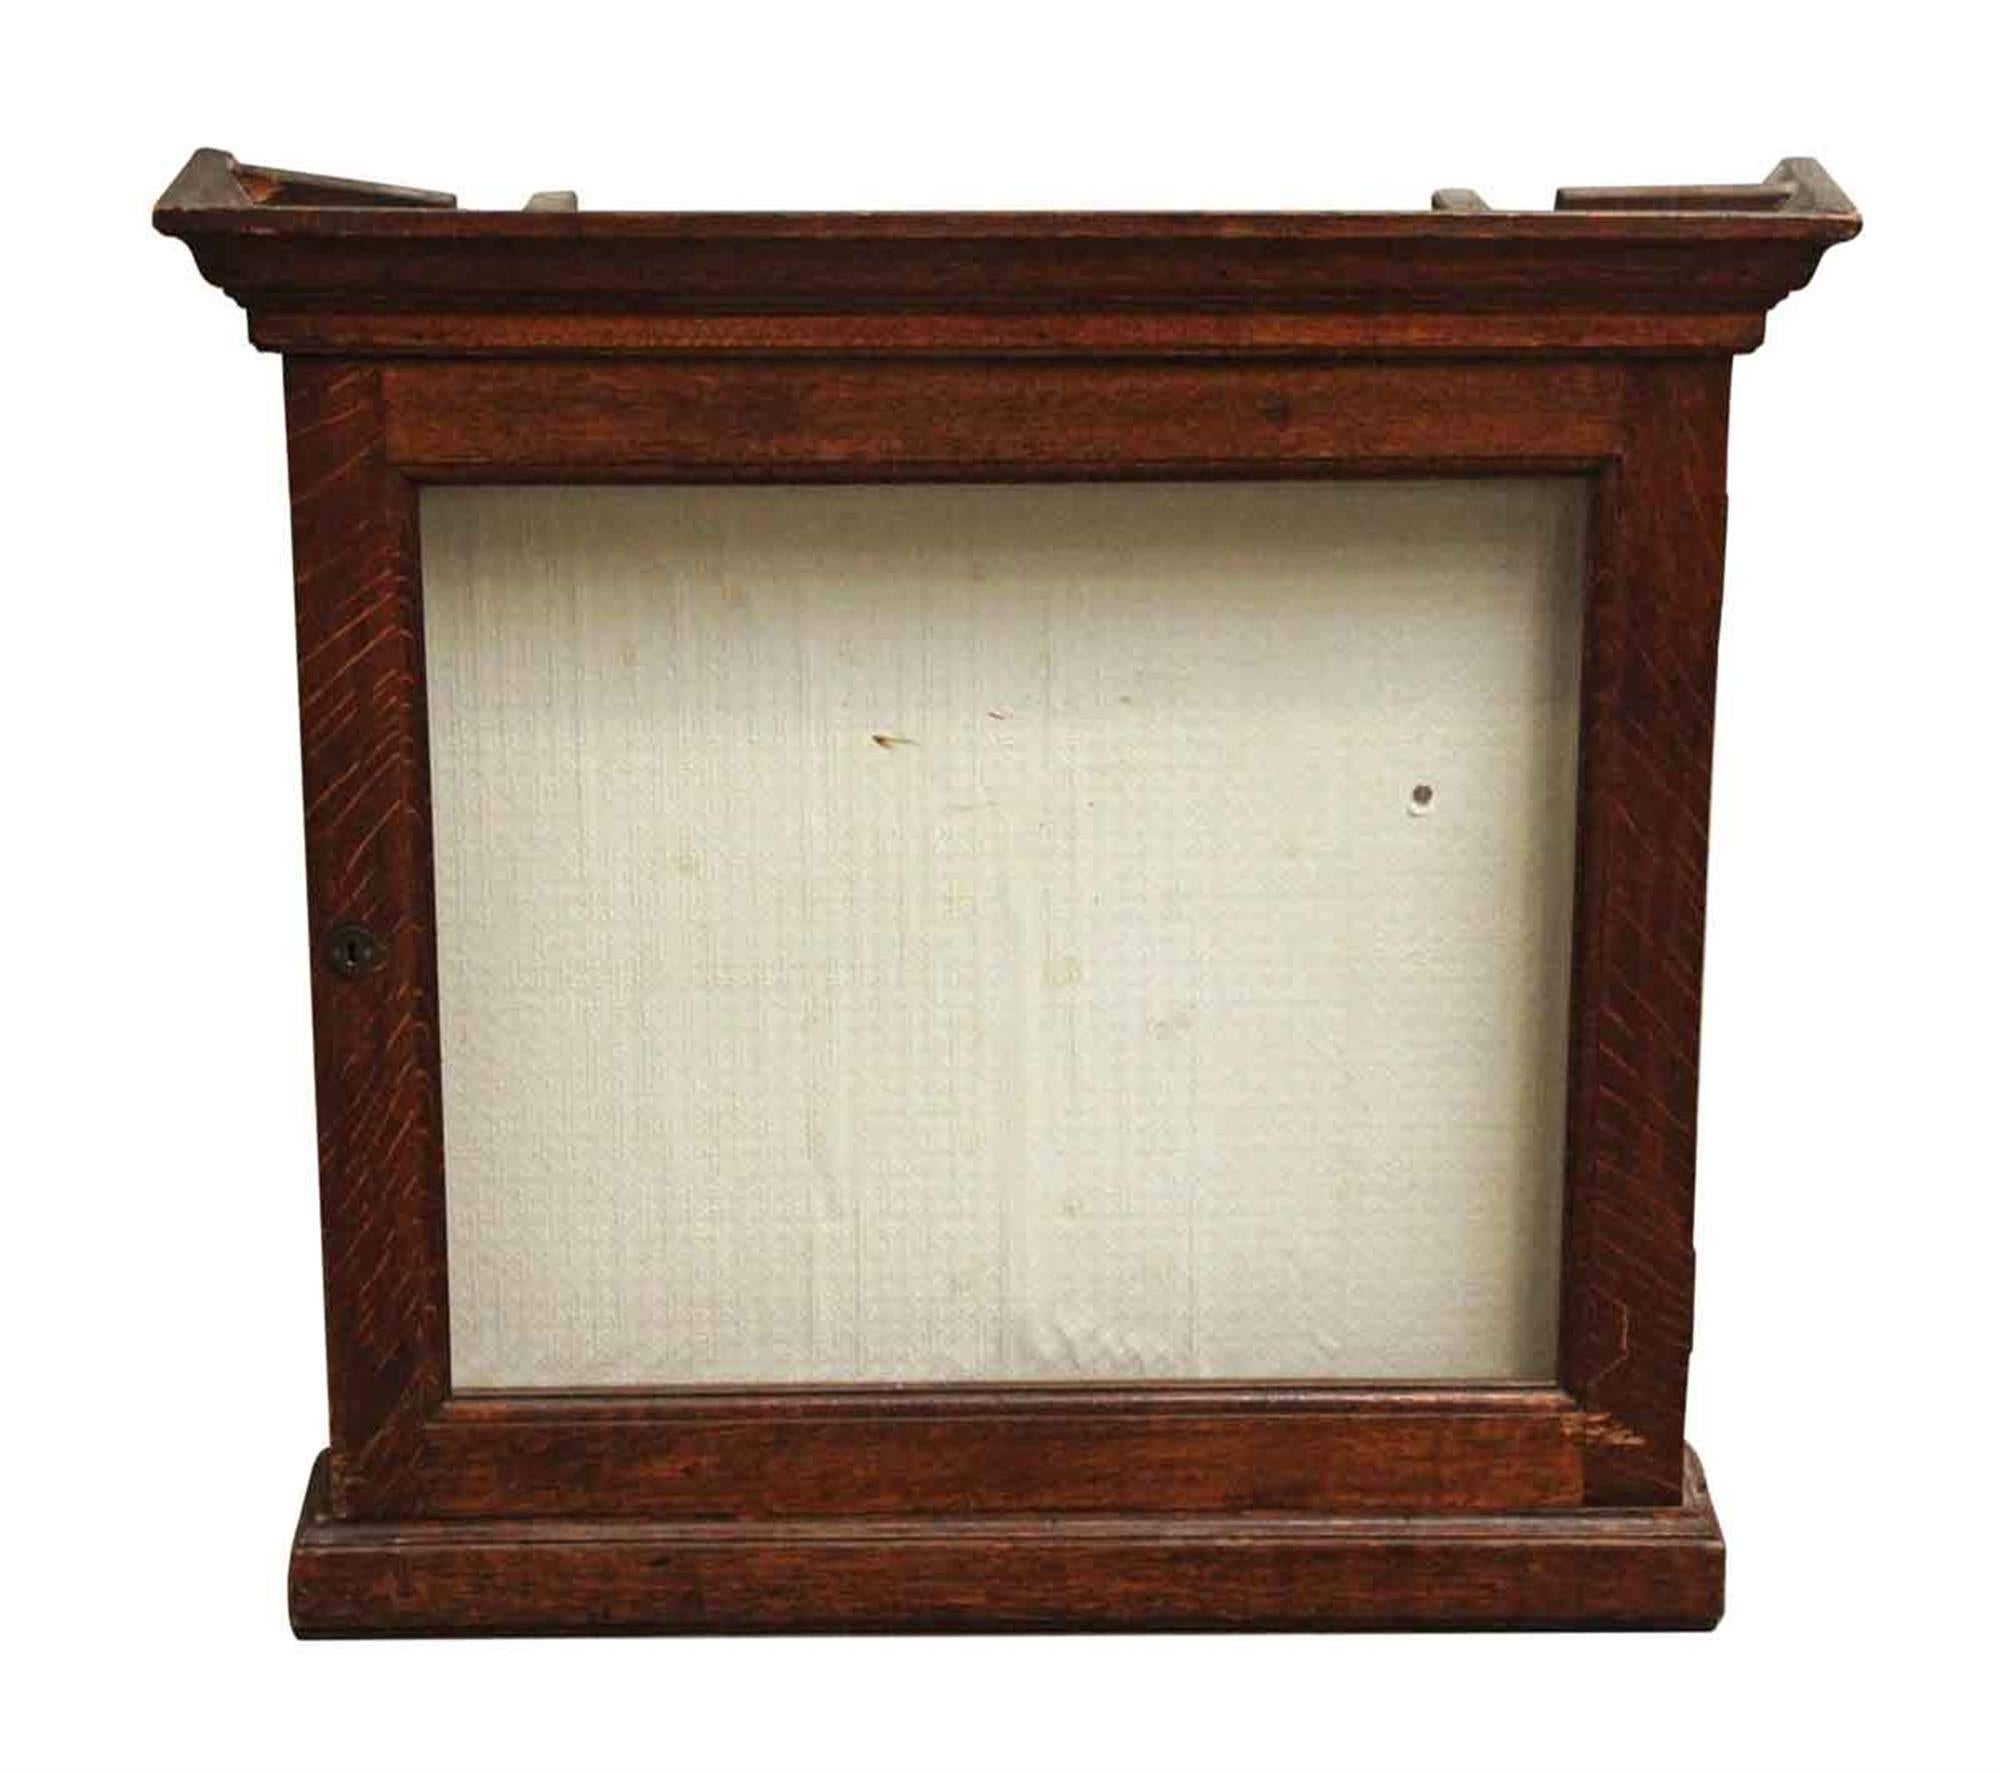 1940s French dark wood tone oak display case with key. This can be seen at our 400 Gilligan St location in Scranton, PA.